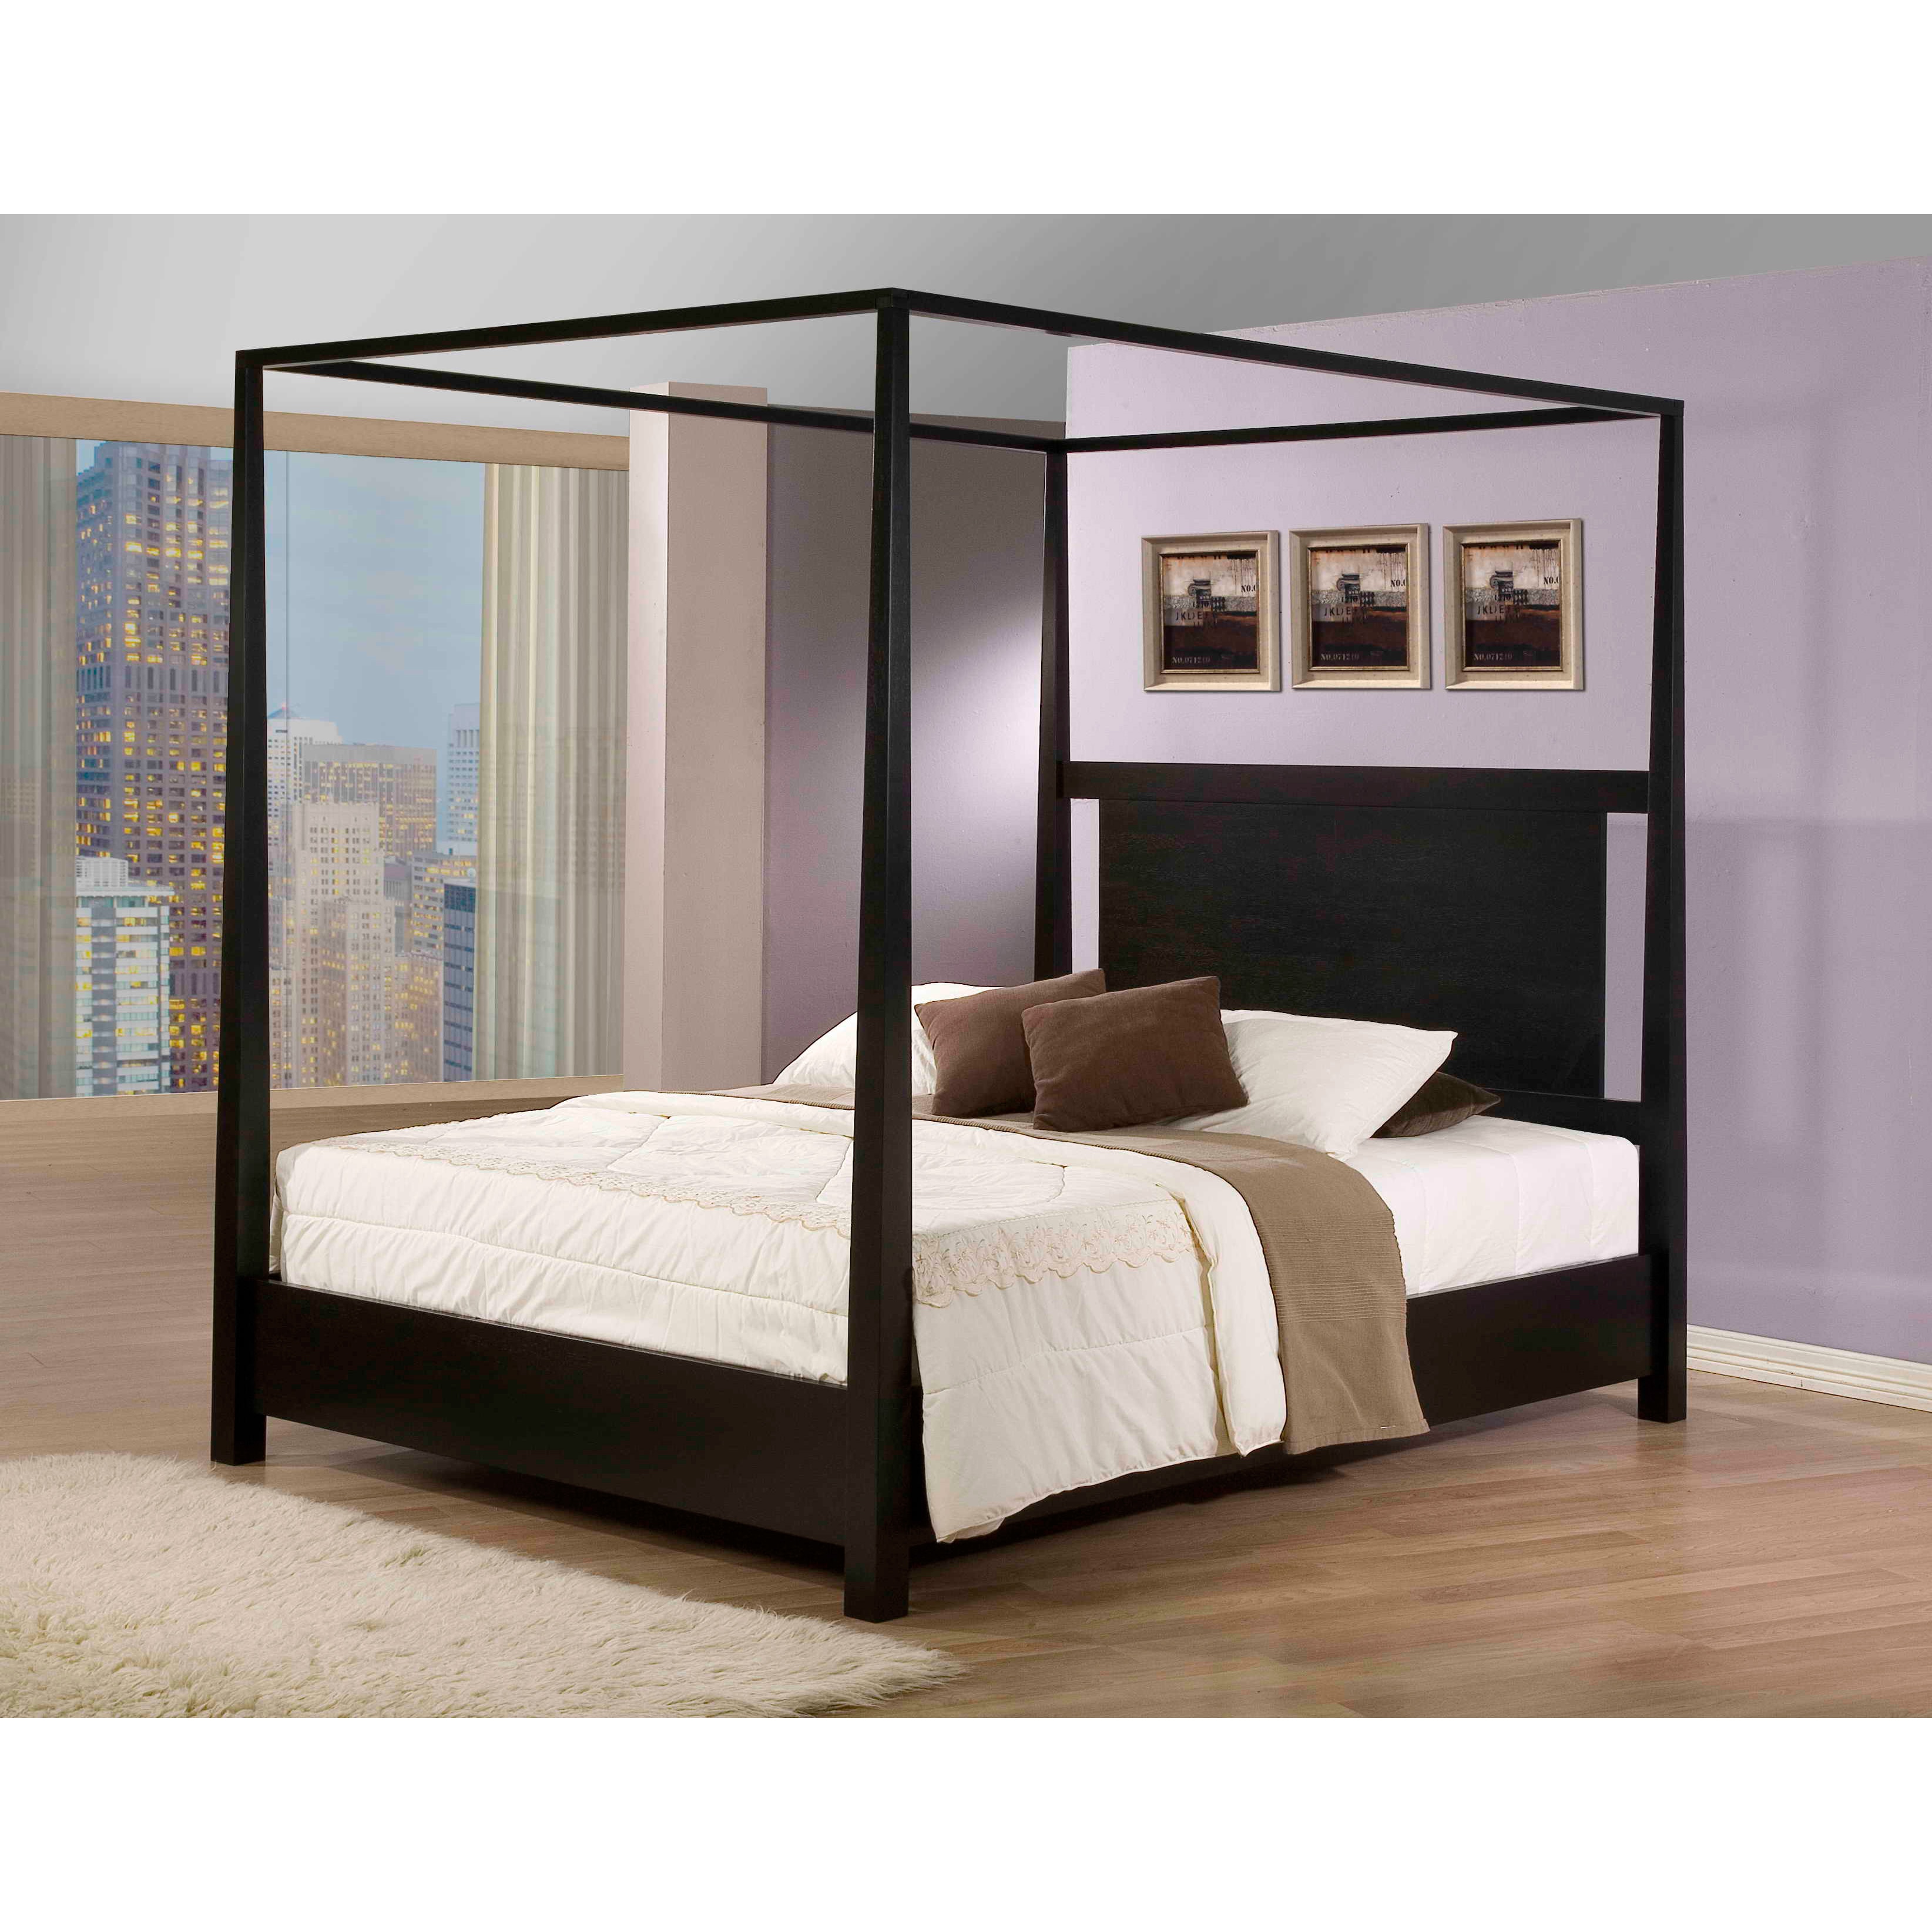 Napa Canopy King Bed - Free Shipping Today - Overstock.com 